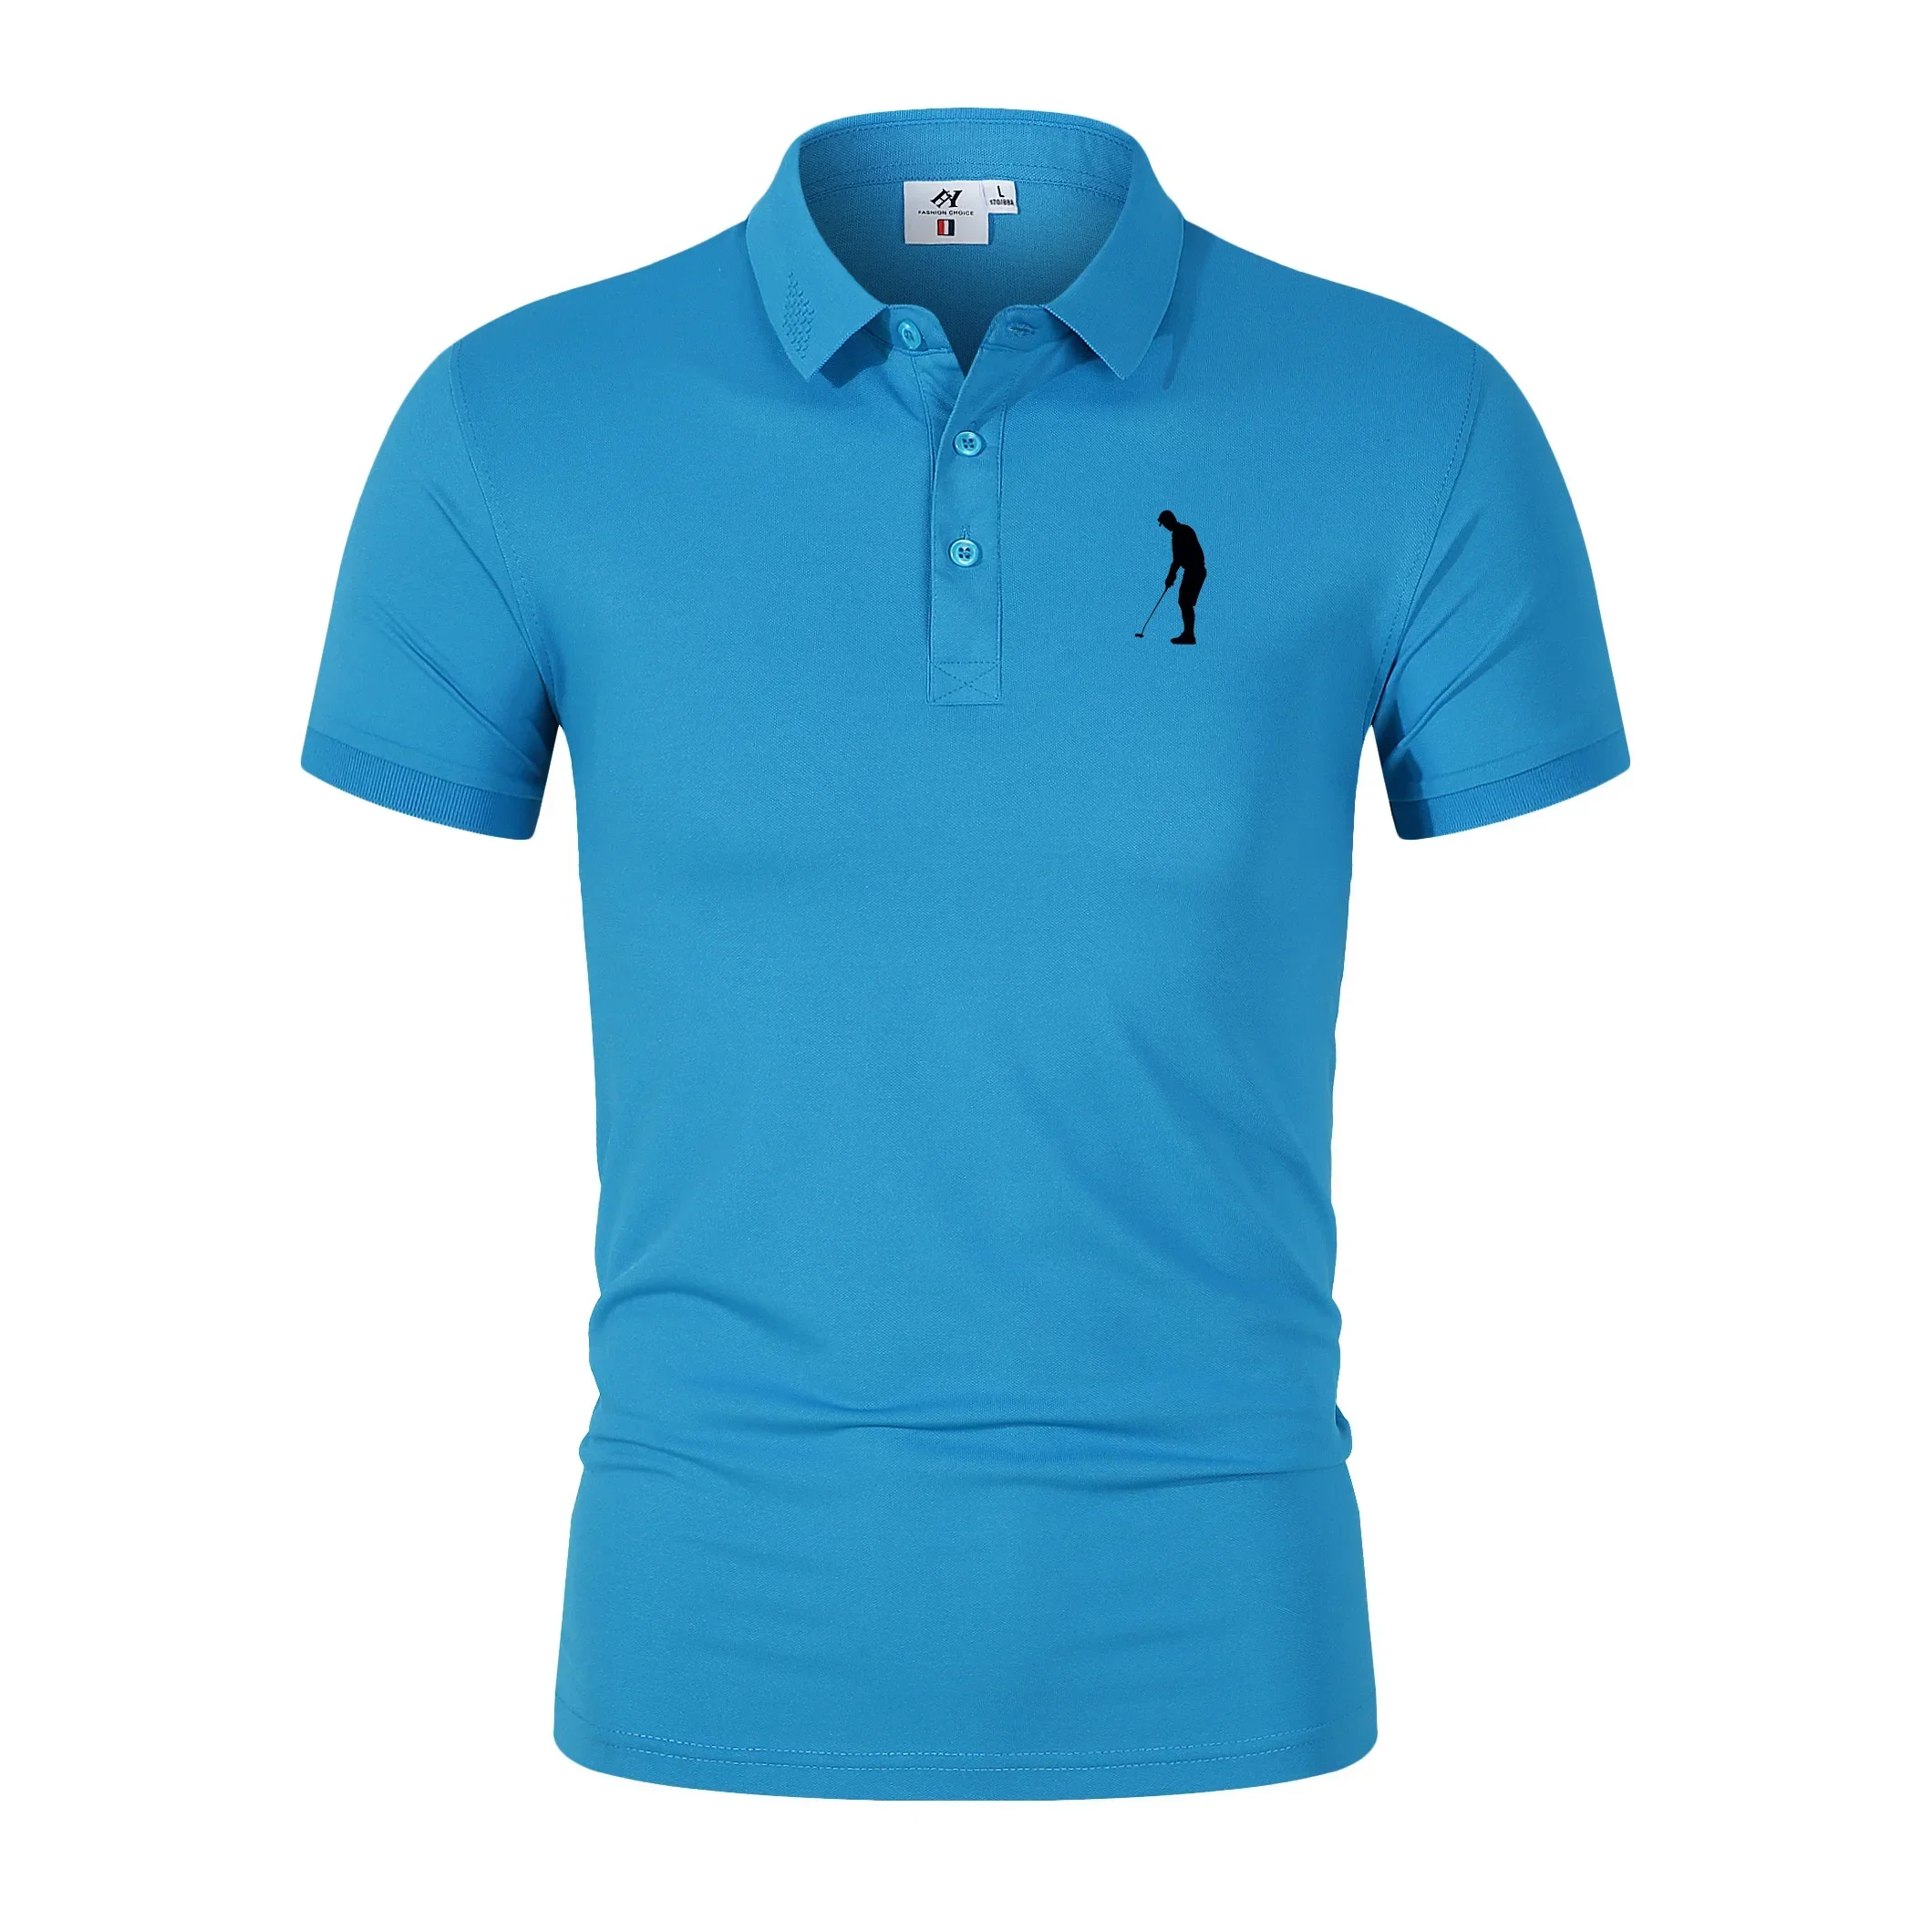 Men's Golf Clothes Summer Lapel Short Sleeve Button Pullovers Trend T-Shirts Tops Work Business Leisure Quick-Dry POLO Shirt